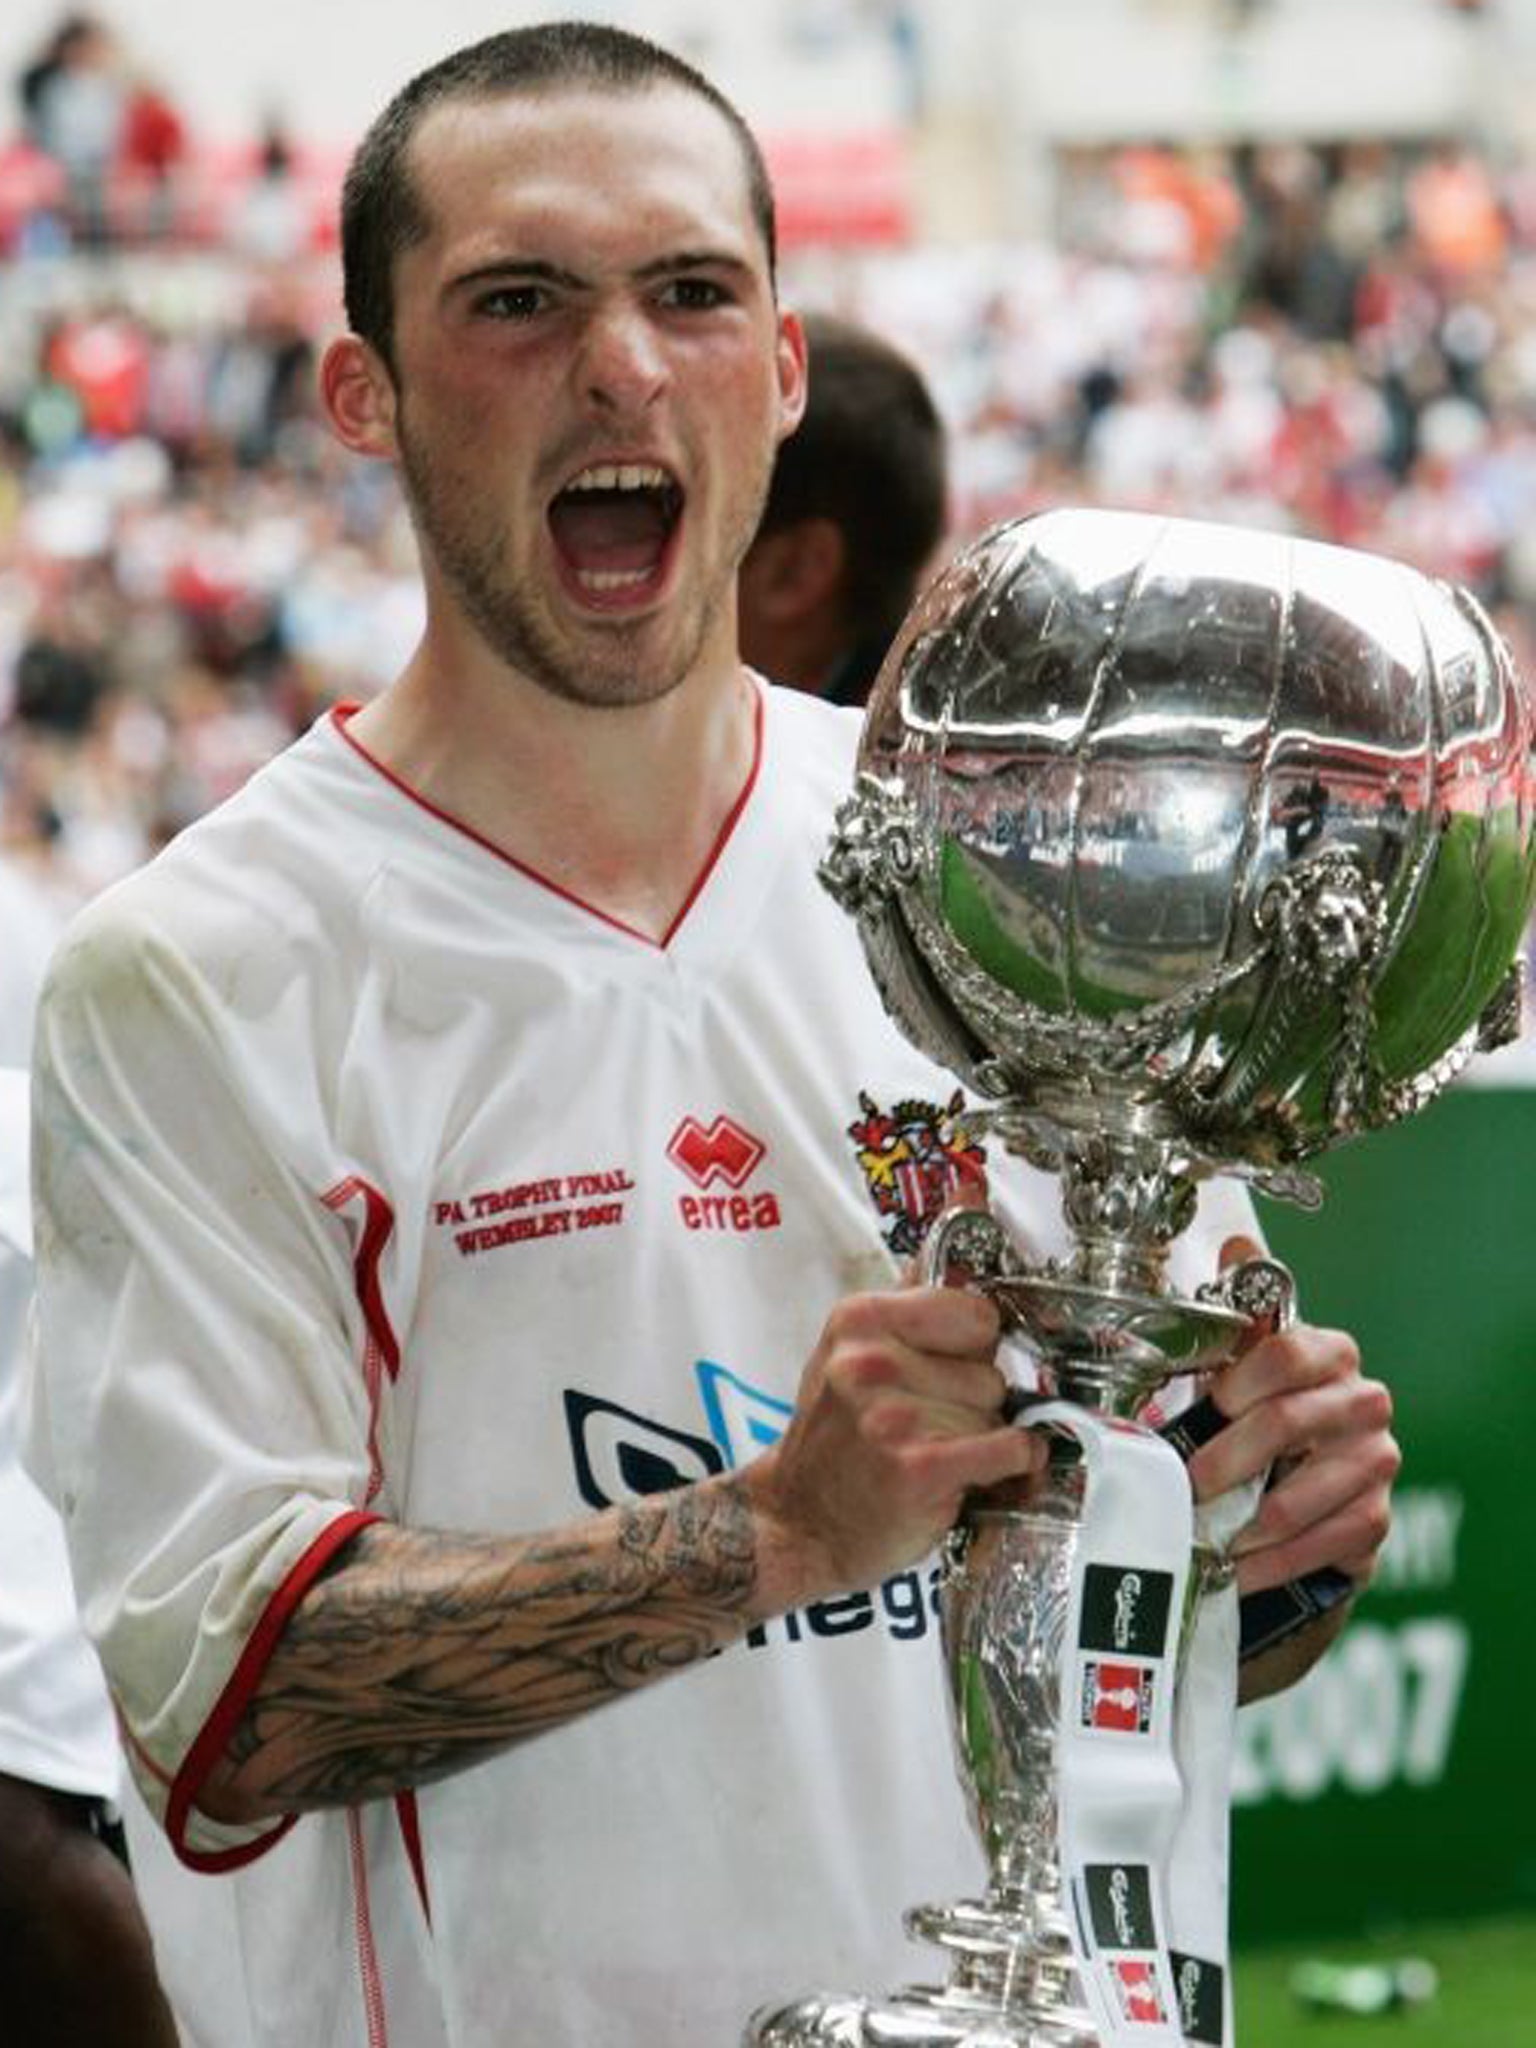 Cole celebrates with the trophy following the FA Trophy Final match between Kidderminster Harriers and Stevenage Borough at Wembley in 2007